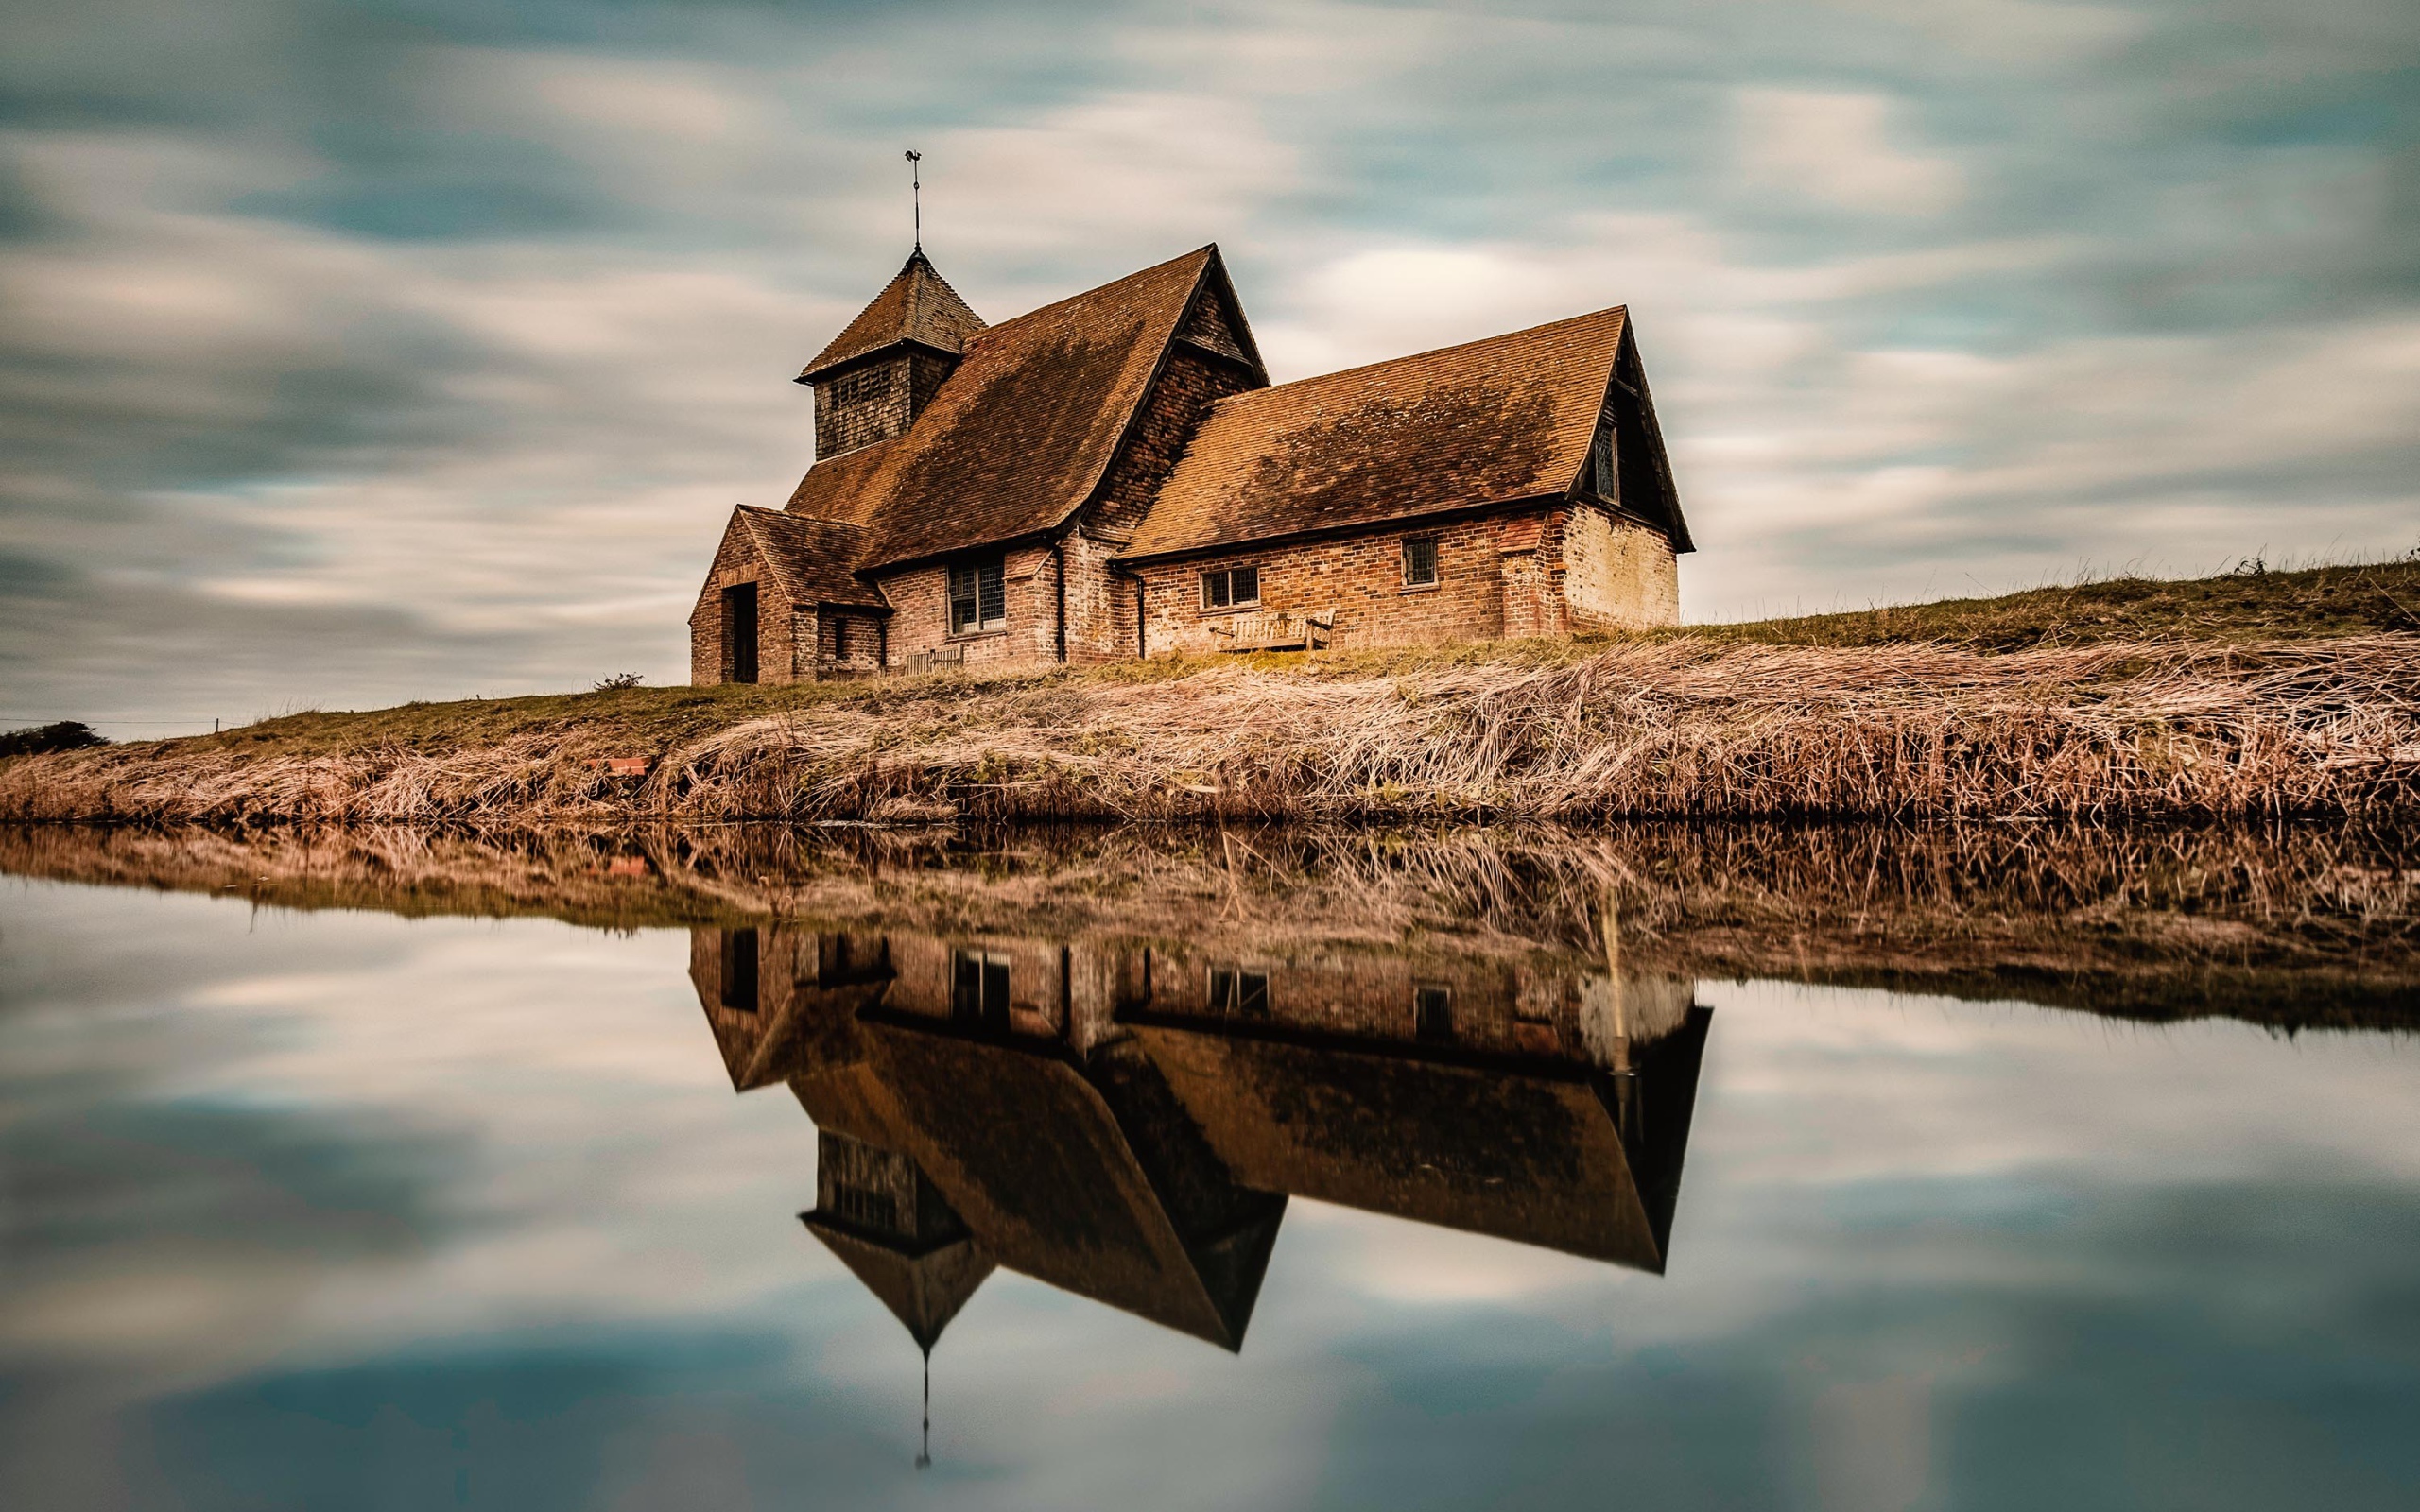 An old house by the river is reflected in the water